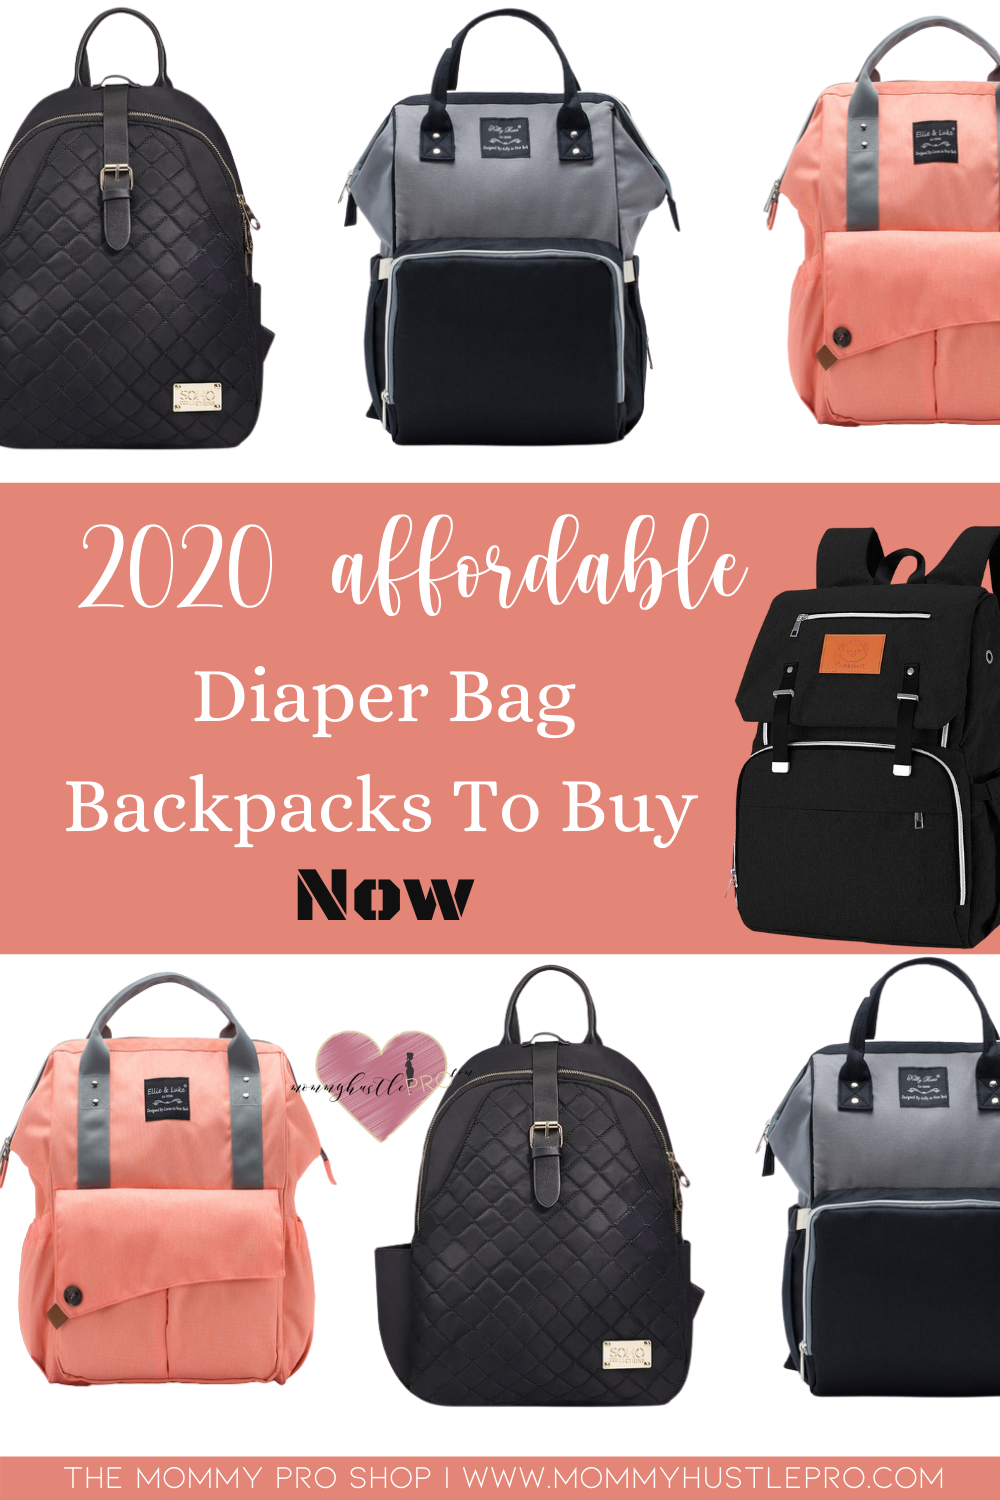 Best Diaper Bag Backpacks You Need To Buy Now - Mommy Hustle Pro